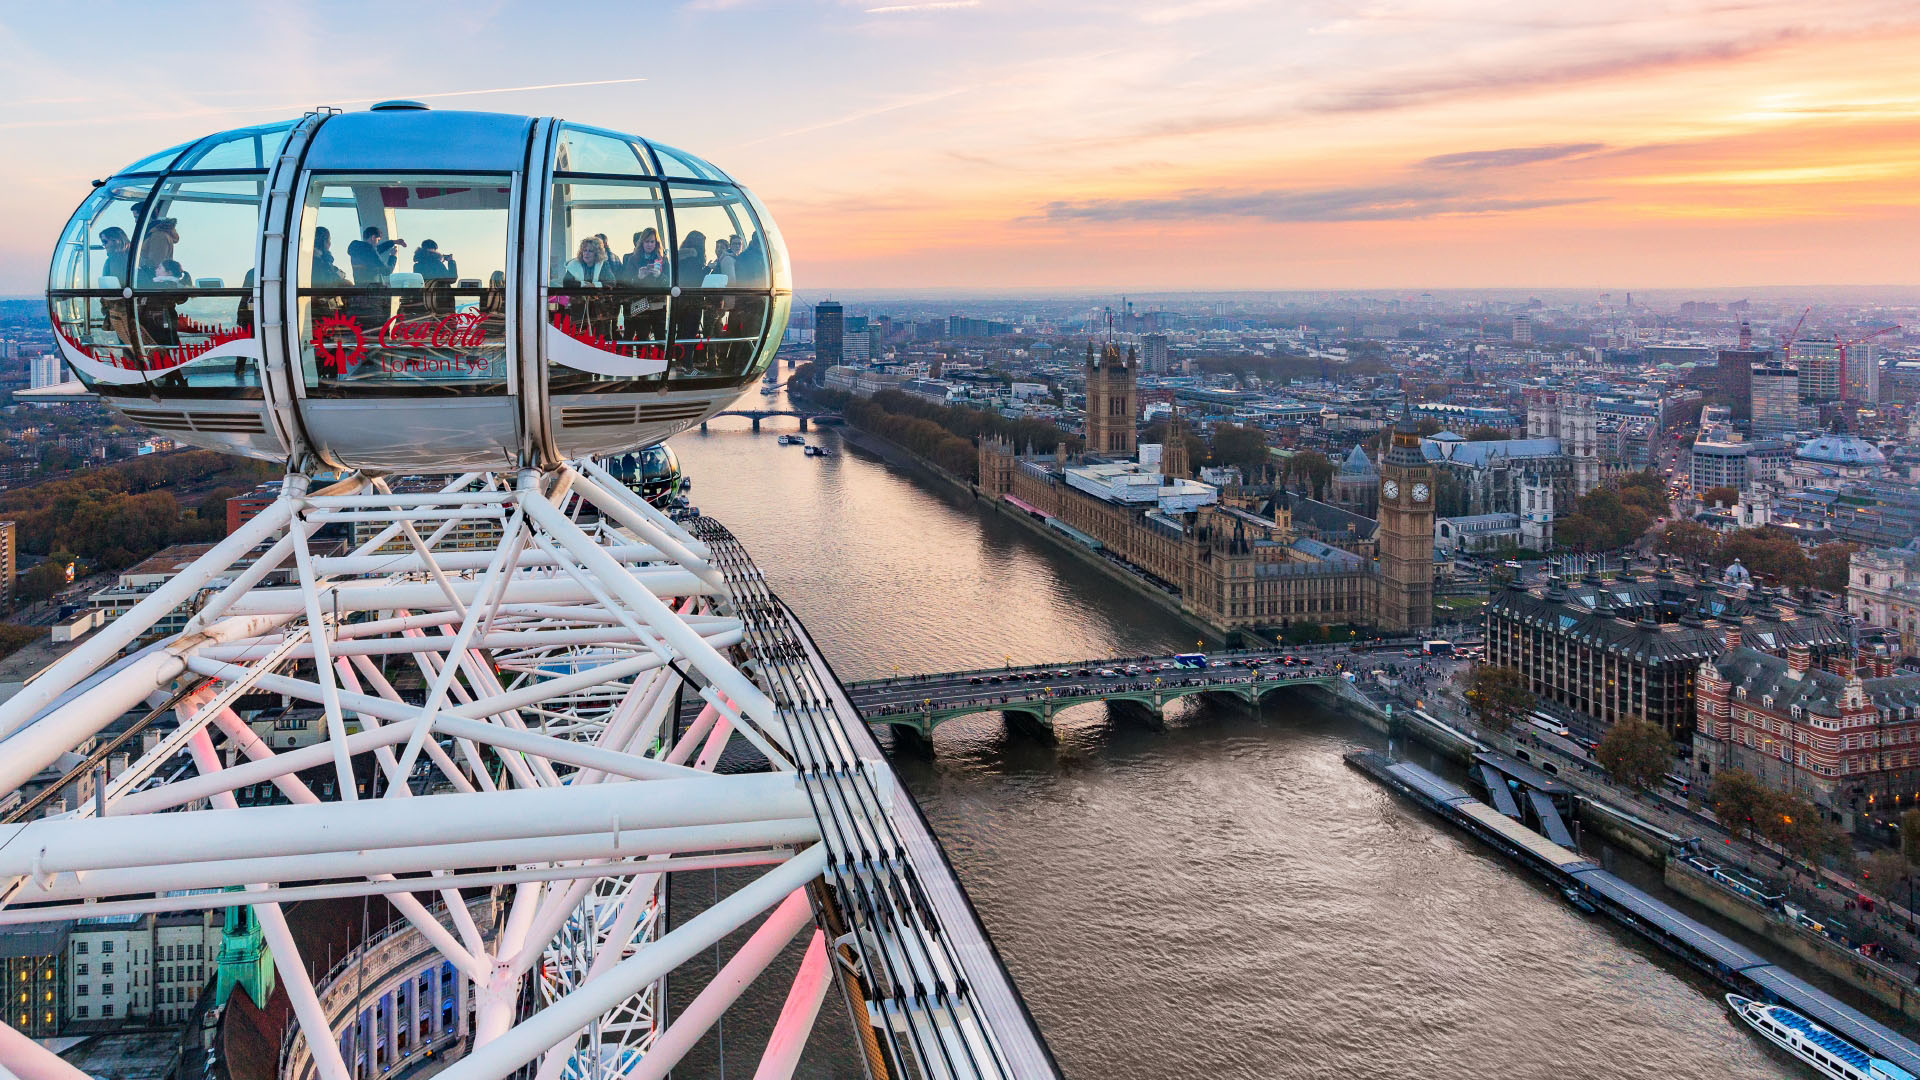 most tourist attractions in london charge admission